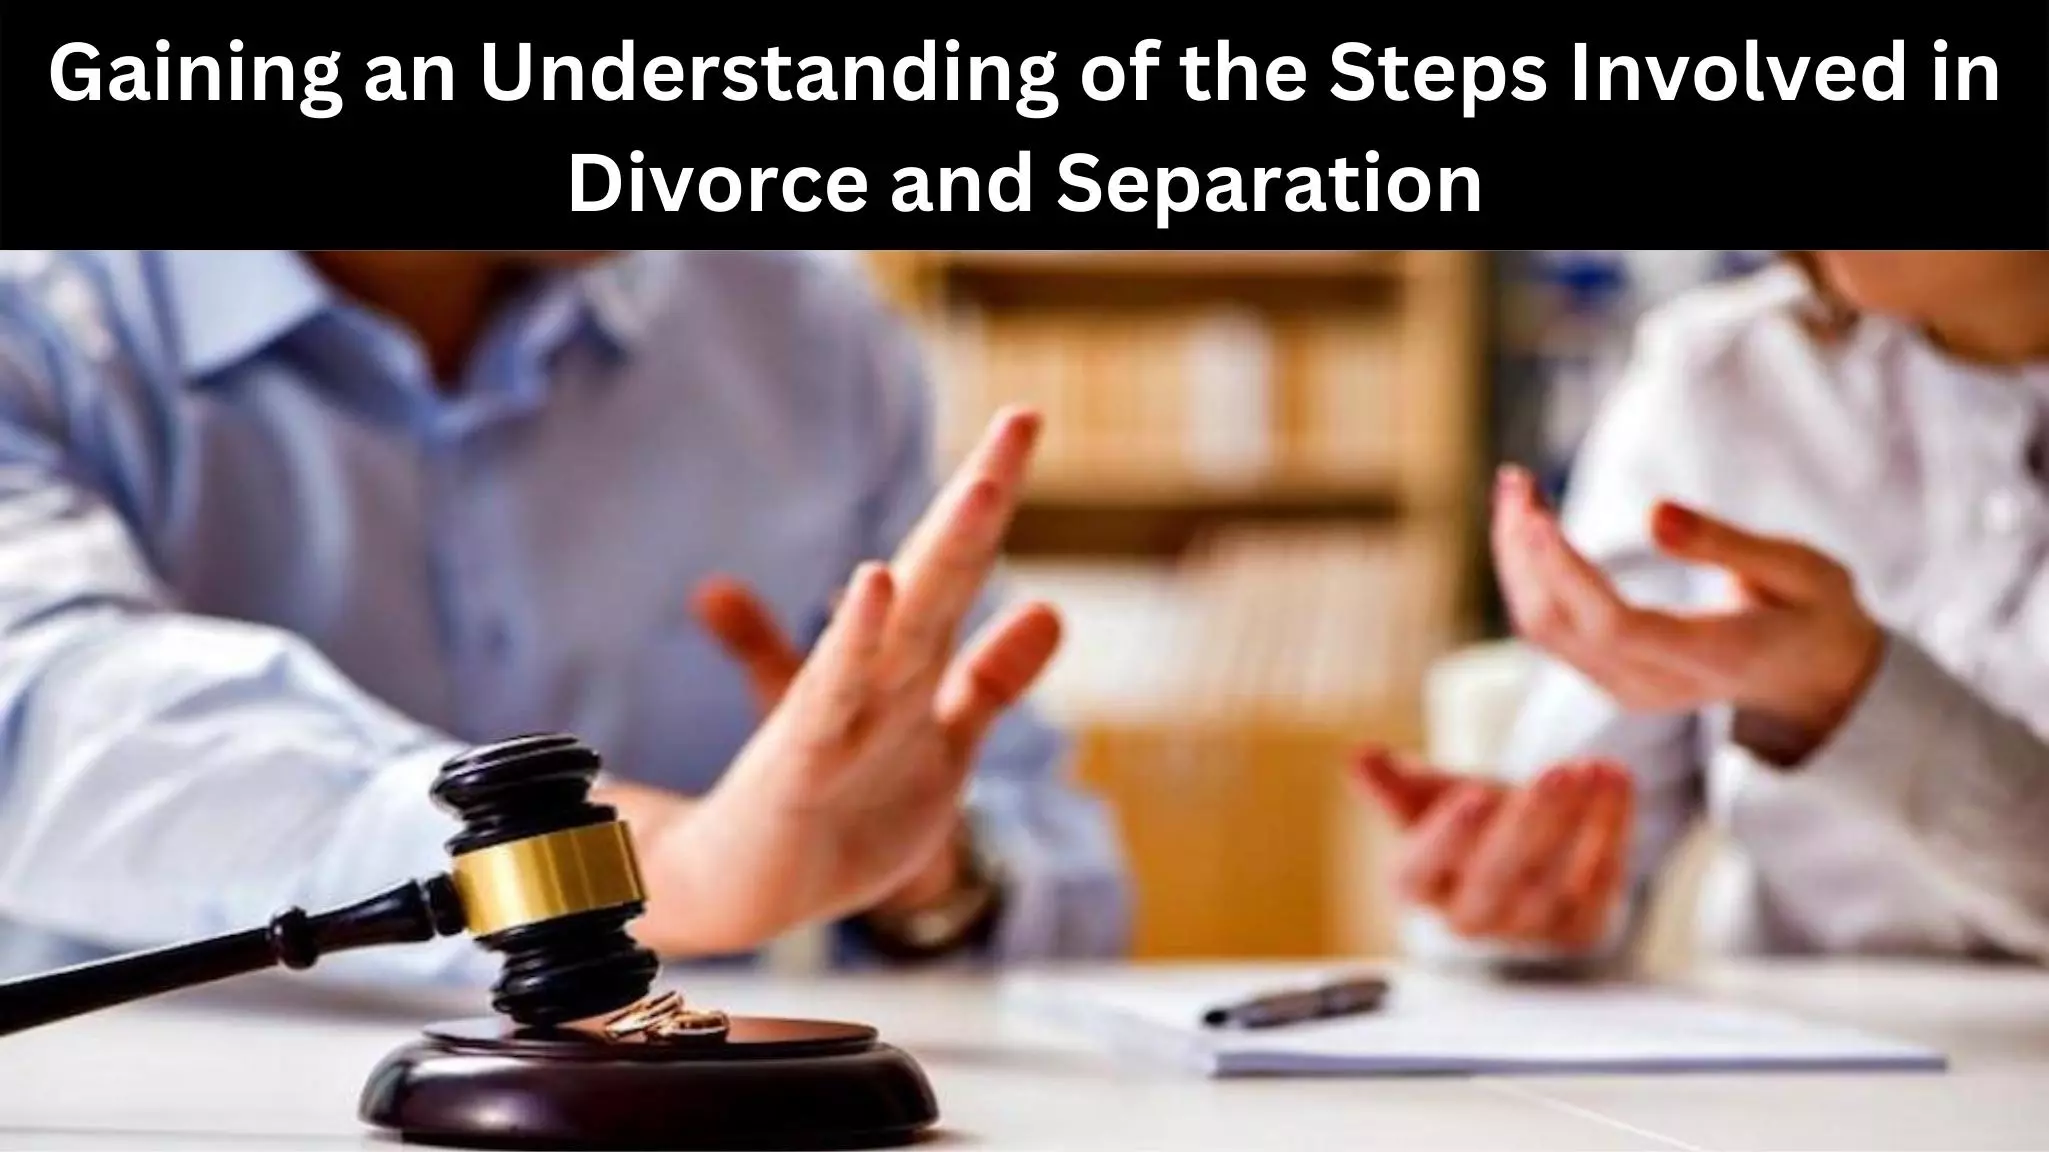 Gaining an Understanding of the Steps Involved in Divorce and Separation